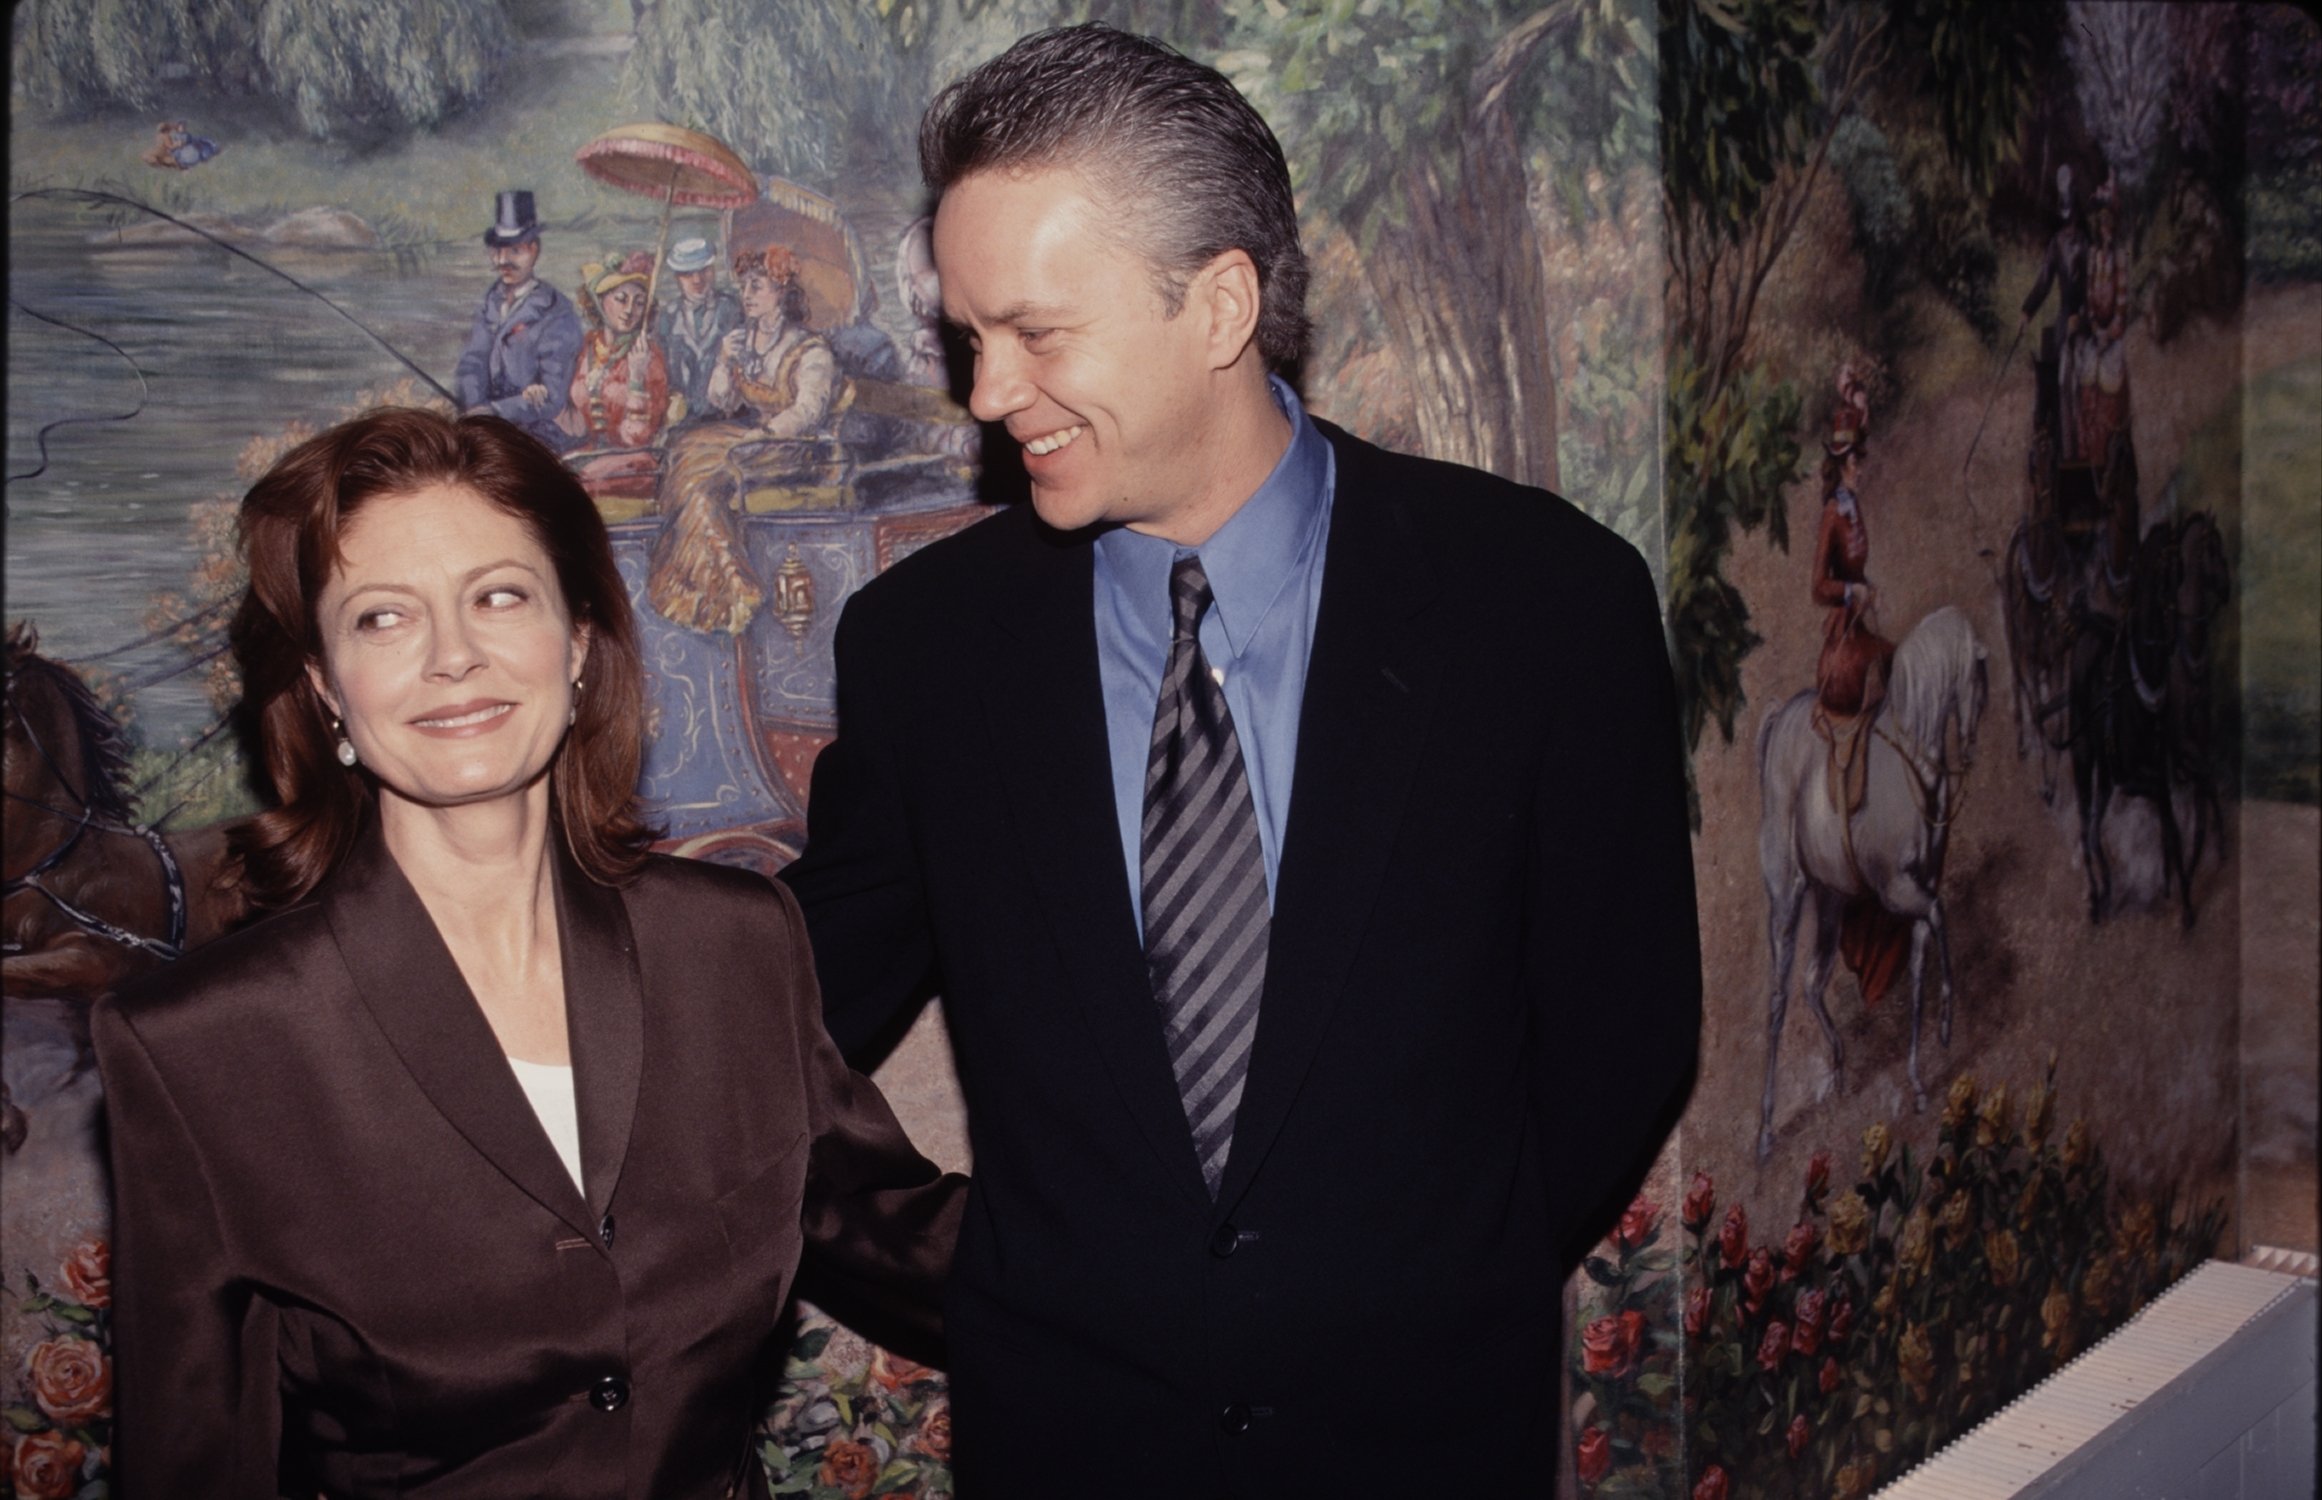 Susan Sarandon and Tim Robbins in the United Sated circa 1995. | Source: Getty Images